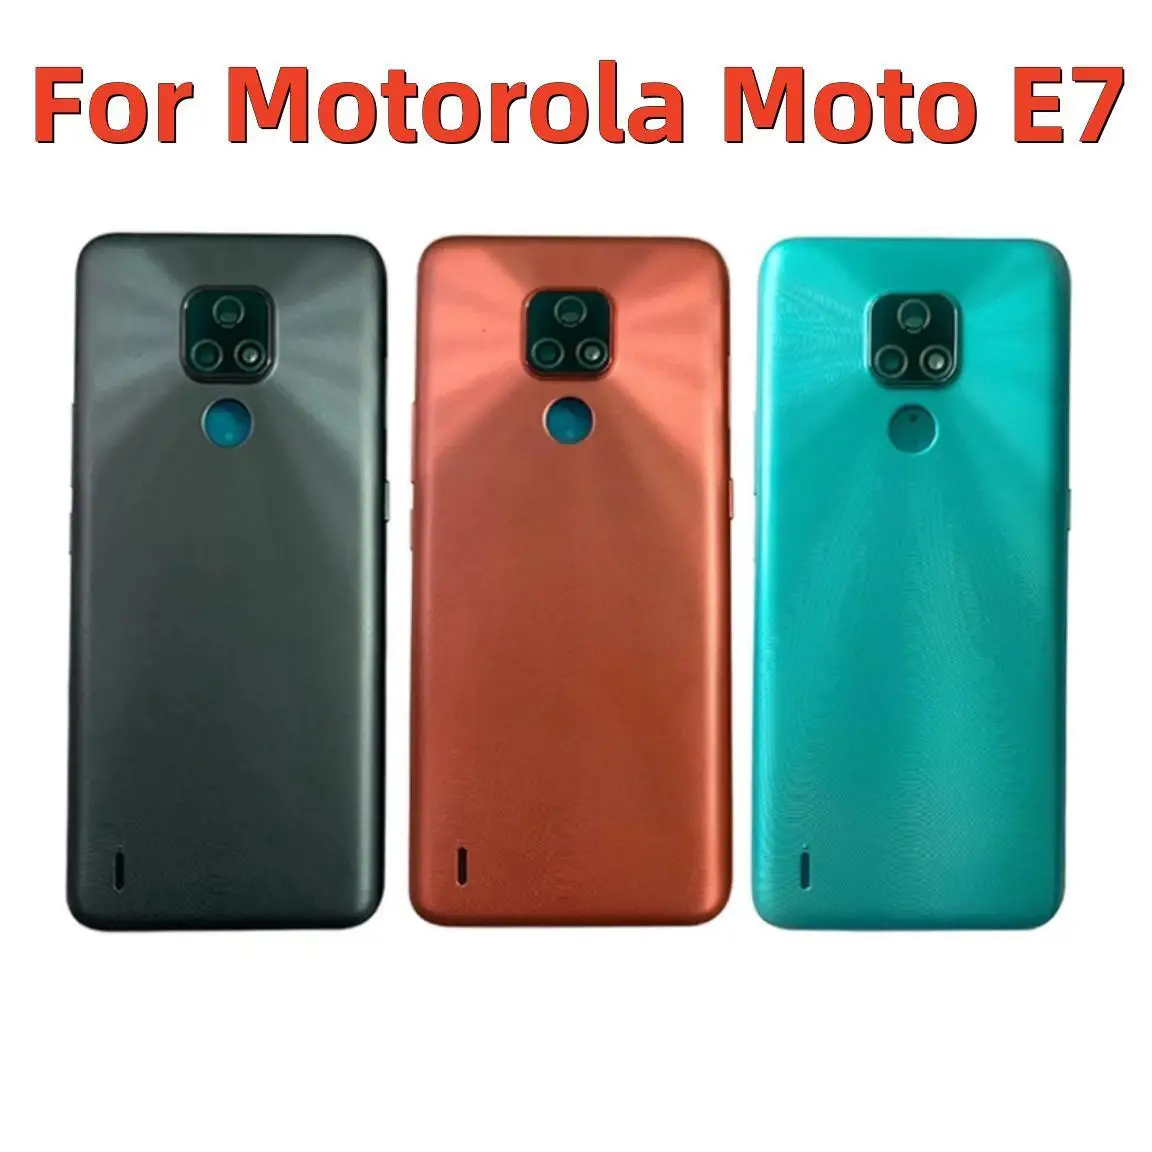 

Battery Cover Back Rear Door Housing Case For Motorola Moto E7 Back Cover with Camera Lens Replacement Repair Parts